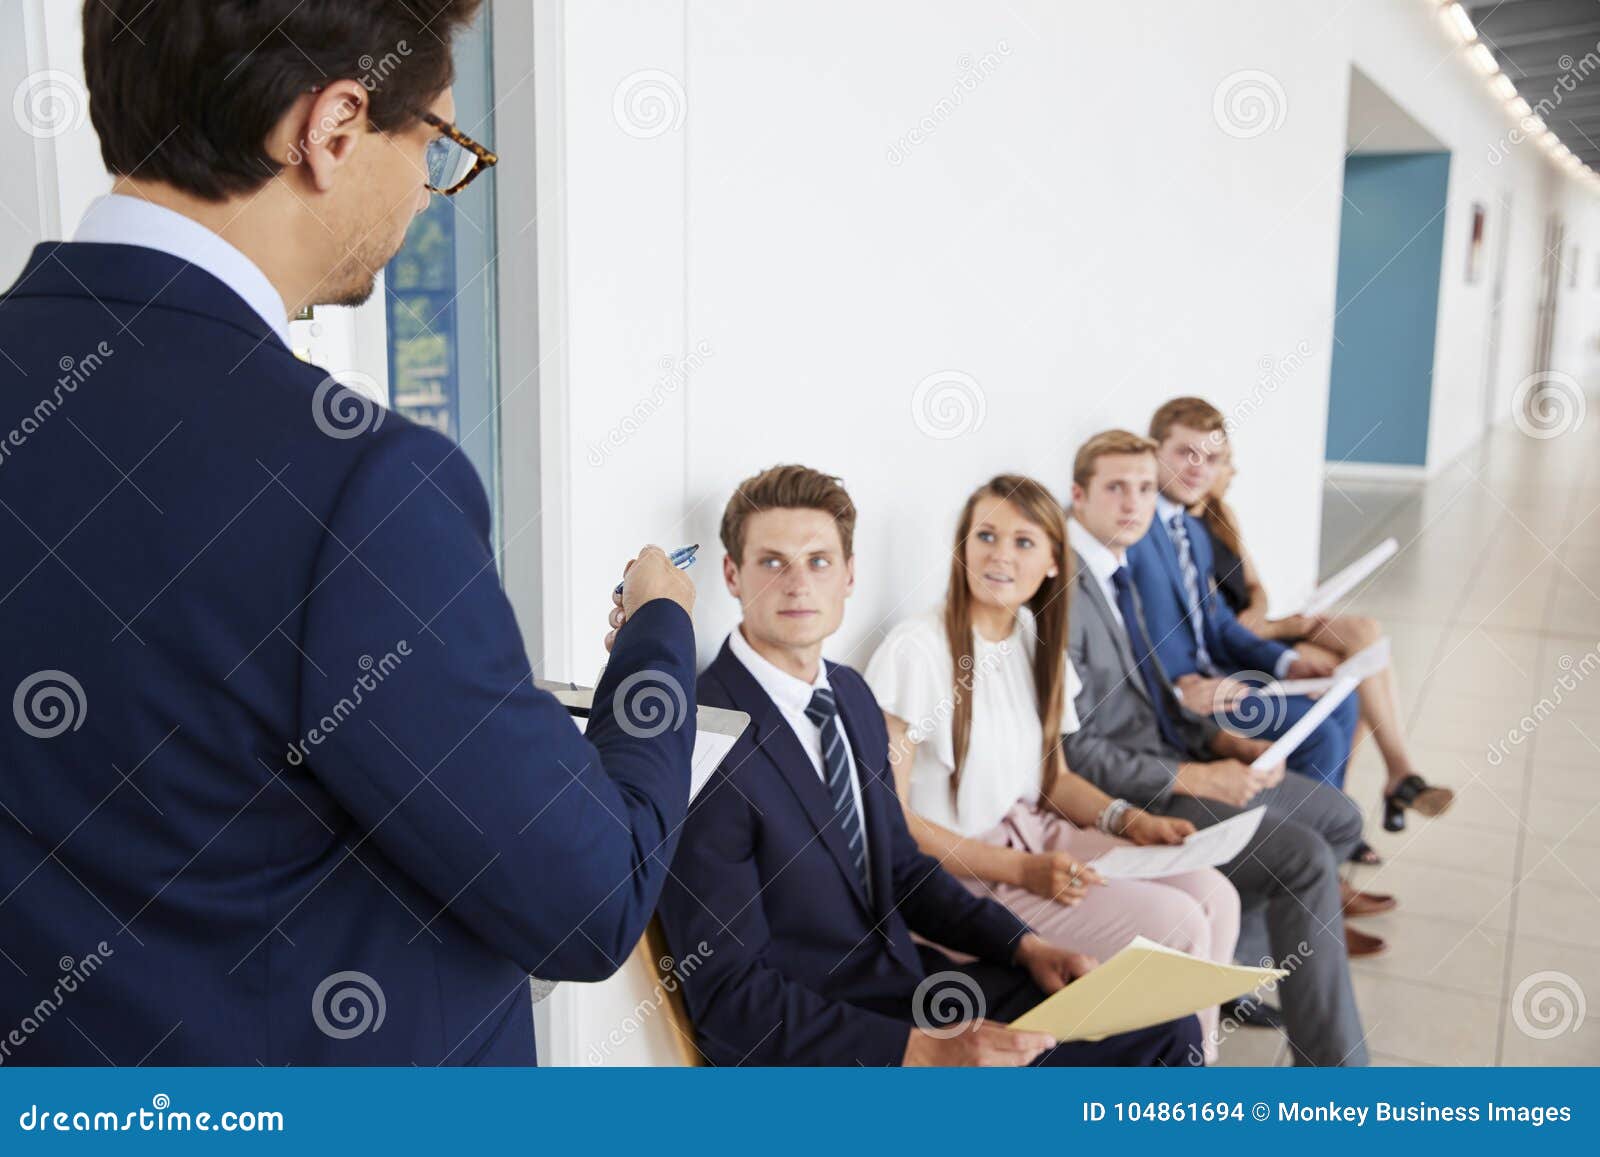 recruiter addressing job candidates waiting for interviews